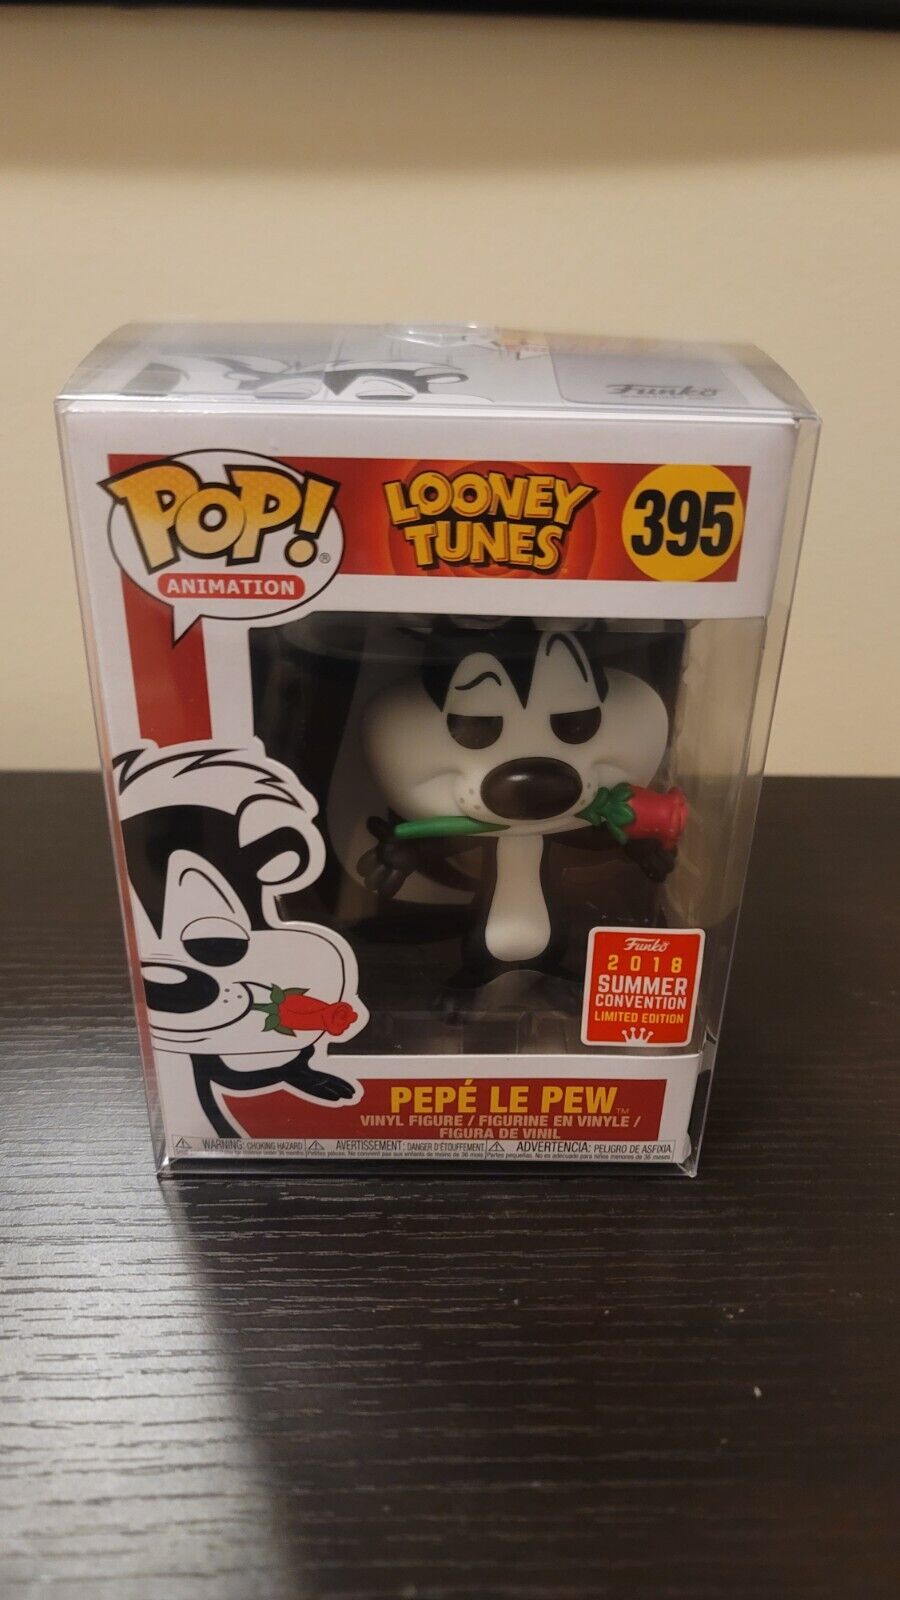 Funko Pop 395 Looney Tunes Pepe Le Pew Figure 2018 Summer Convention Edition